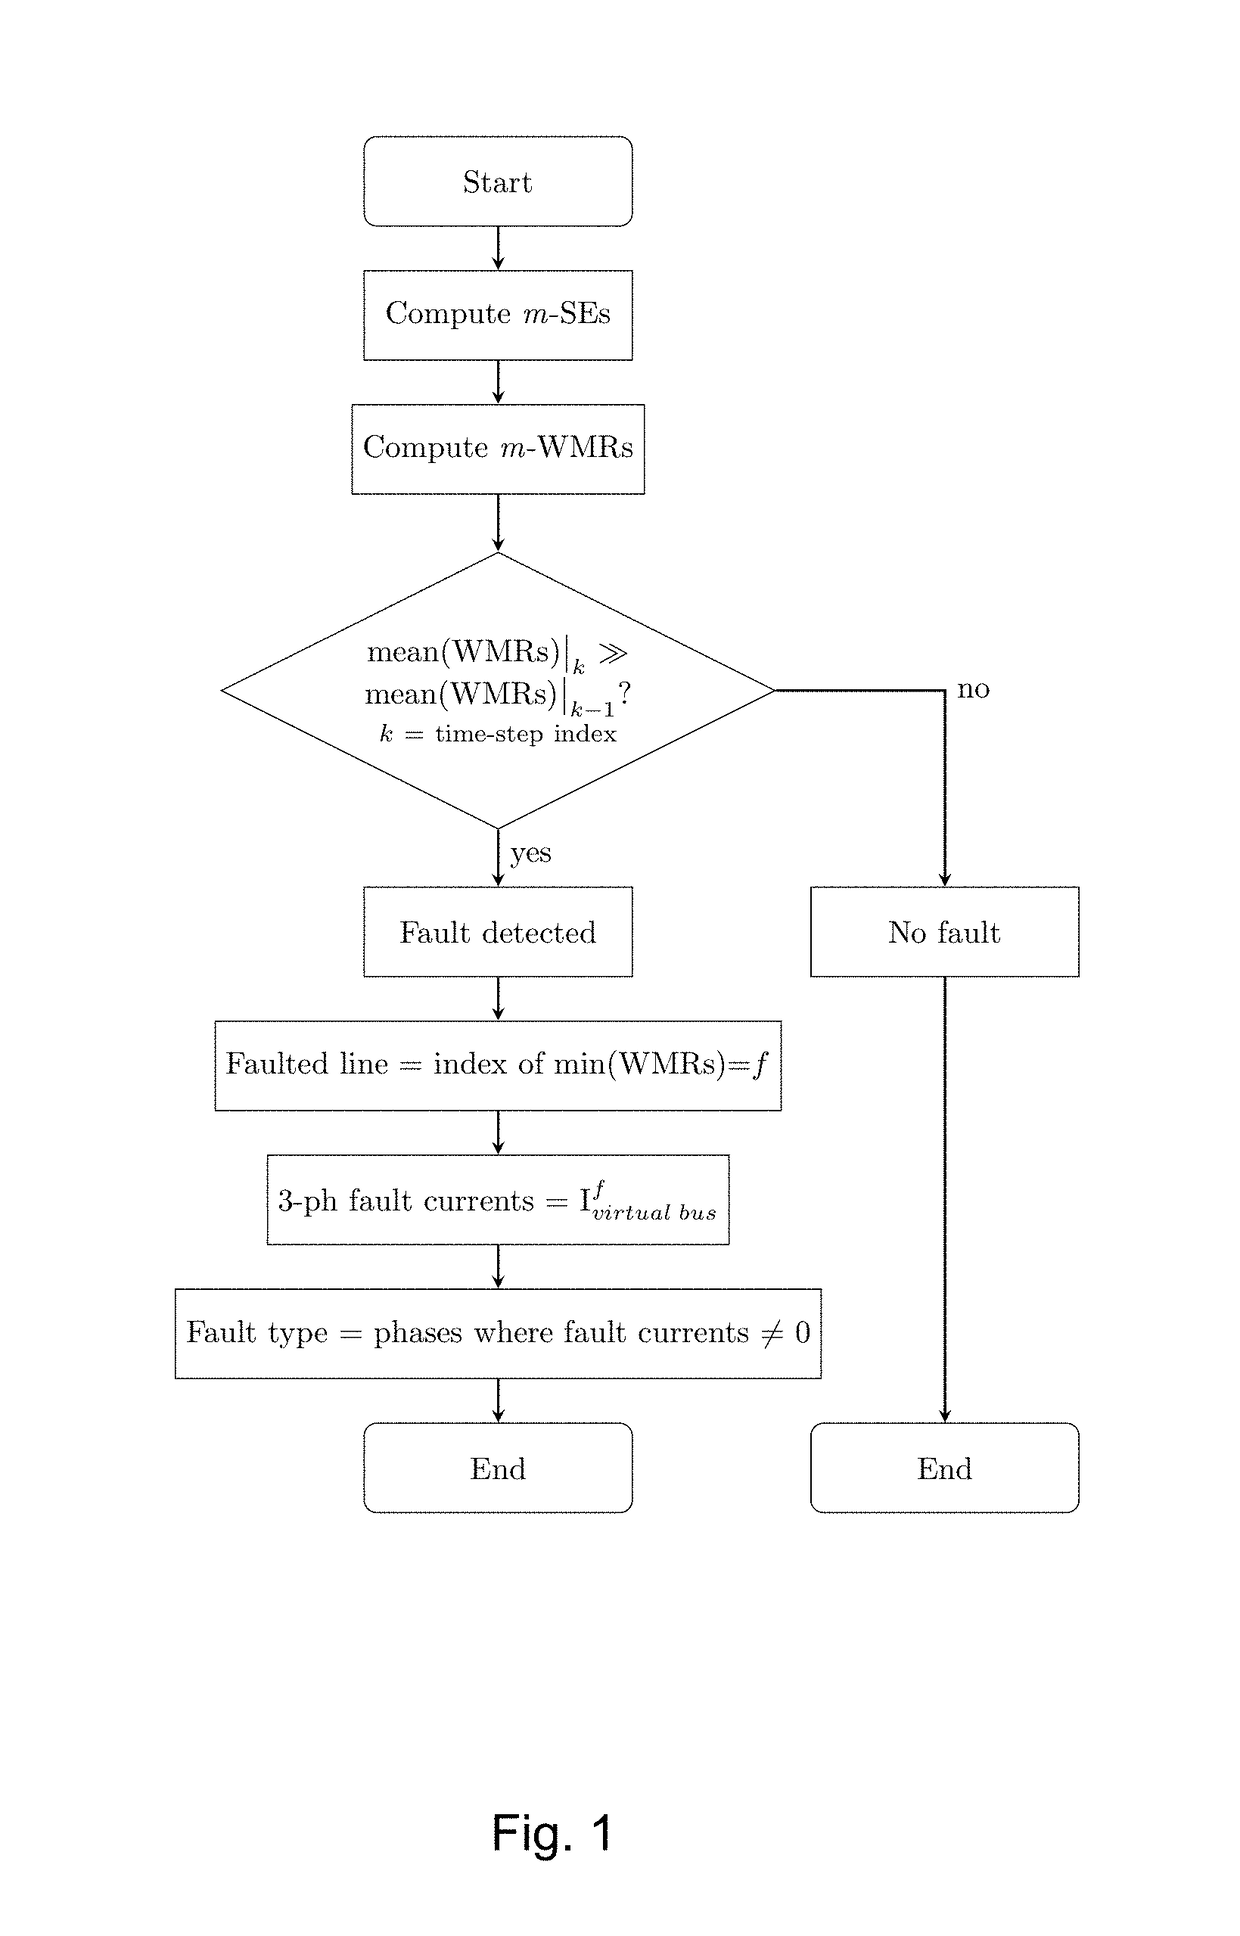 Method and System for Fault Detection and Faulted Line Identification in Power Systems using Synchrophasors-Based Real-Time State Estimation